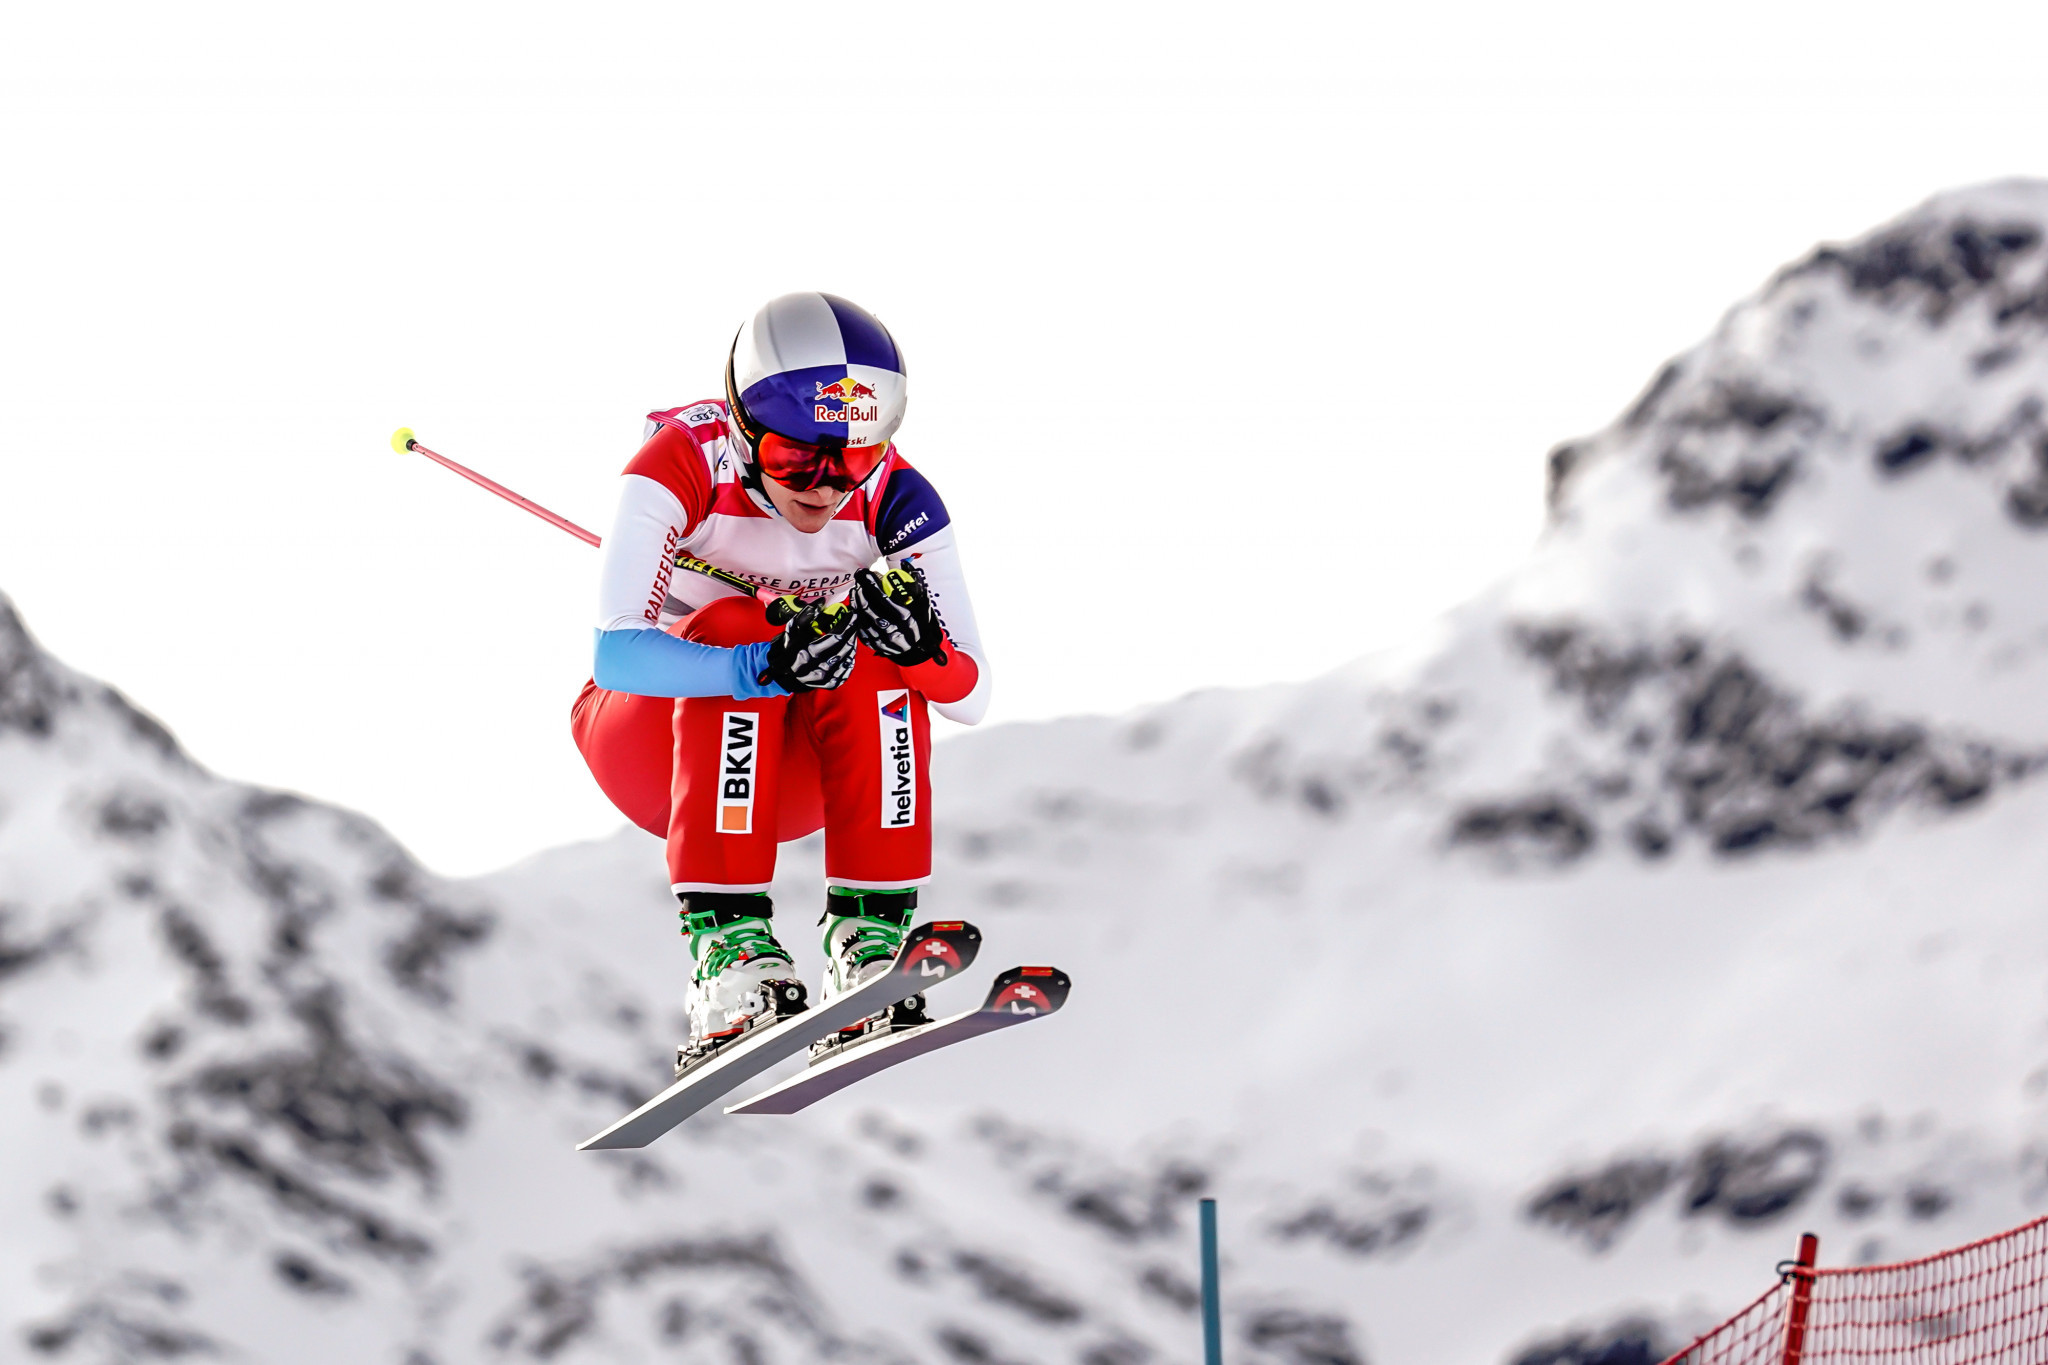 Fanny Smith topped qualifying at the FIS Ski Cross World Cup event in Val Thorens ©Getty Images